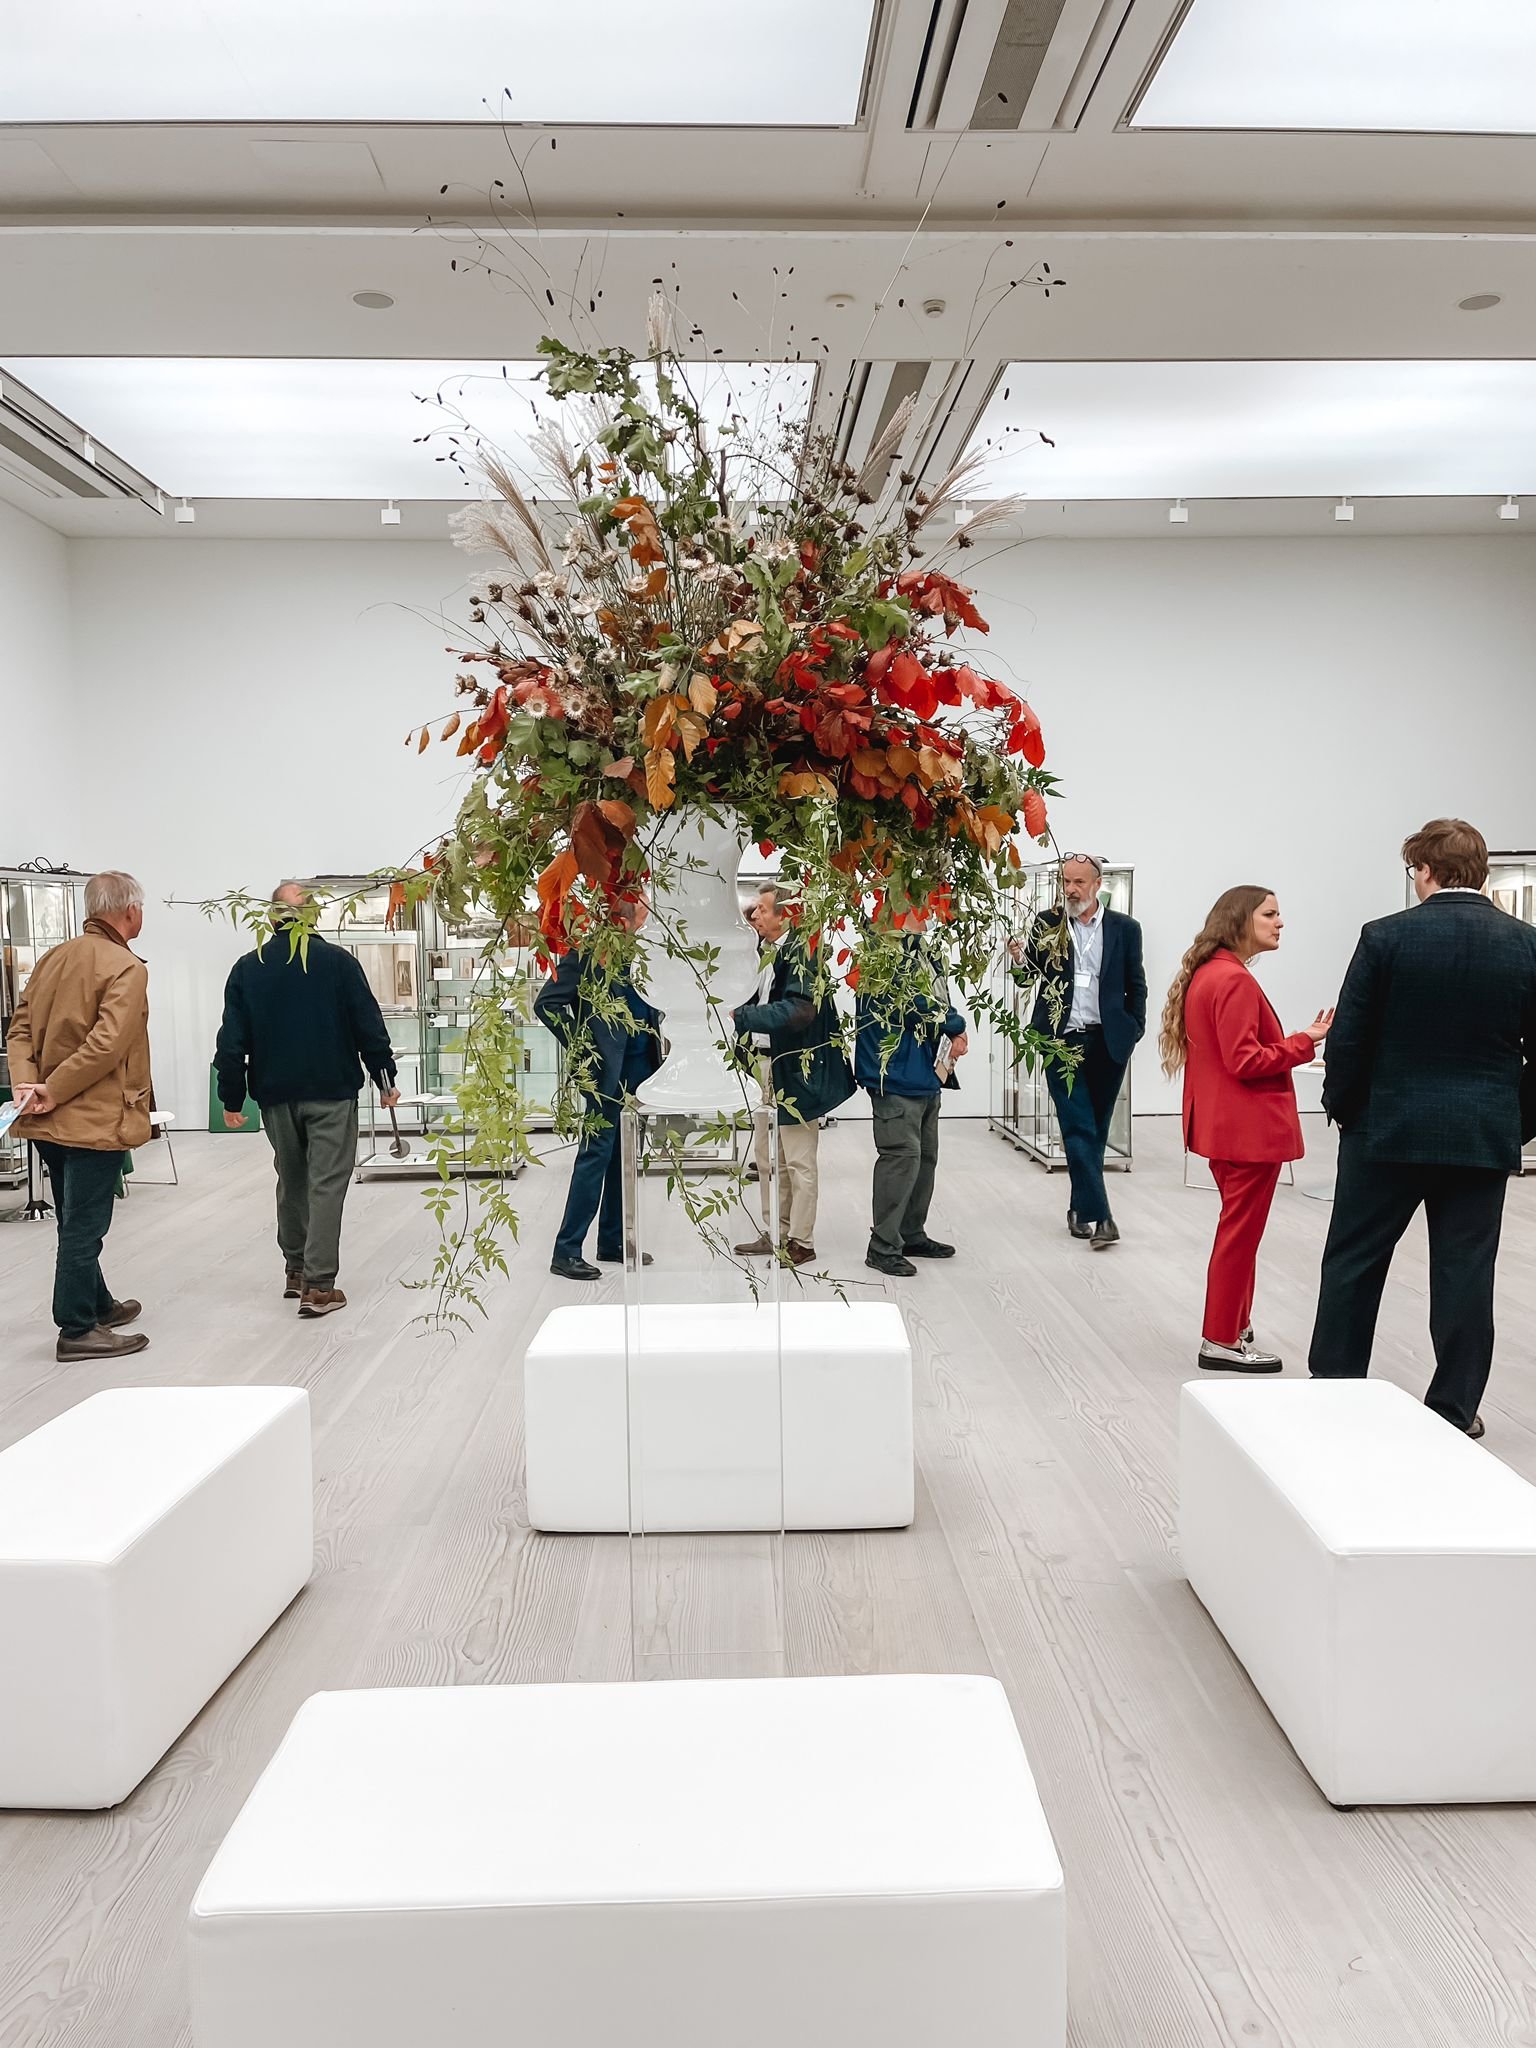 Flowers for the Saatchi Gallery in London